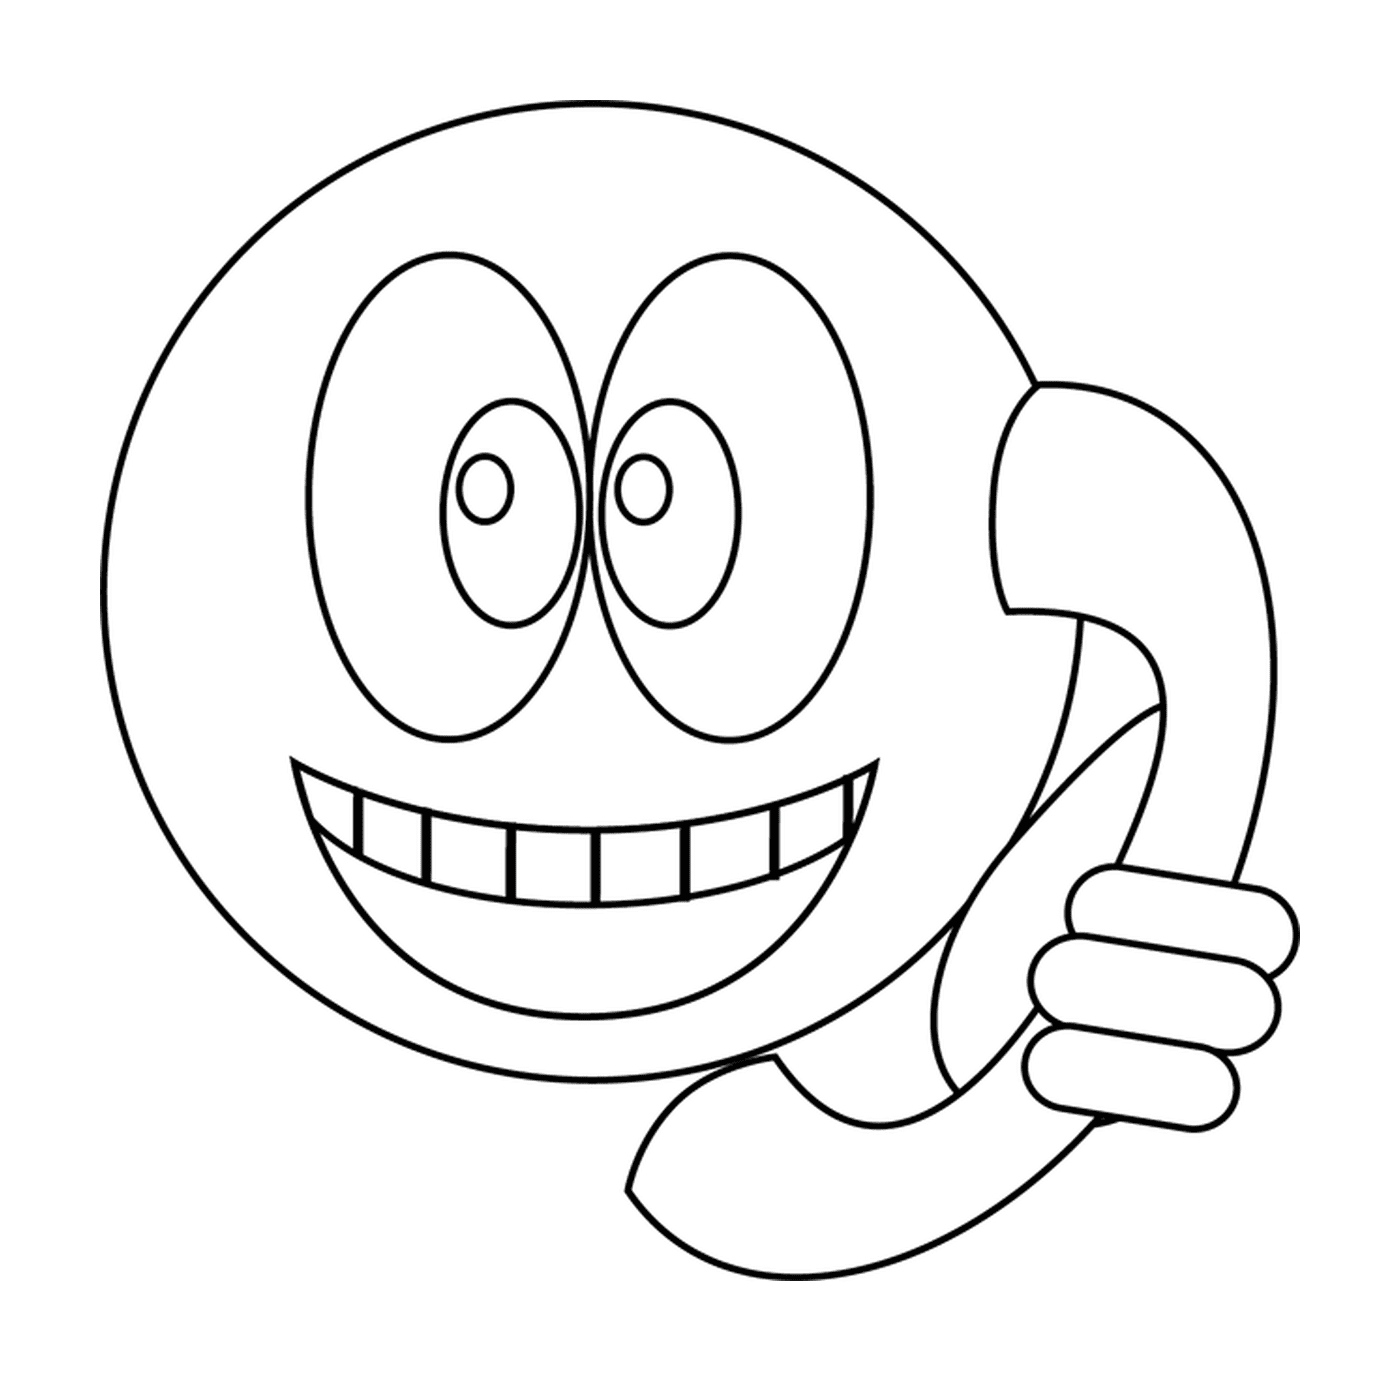  Smiley holding phone 